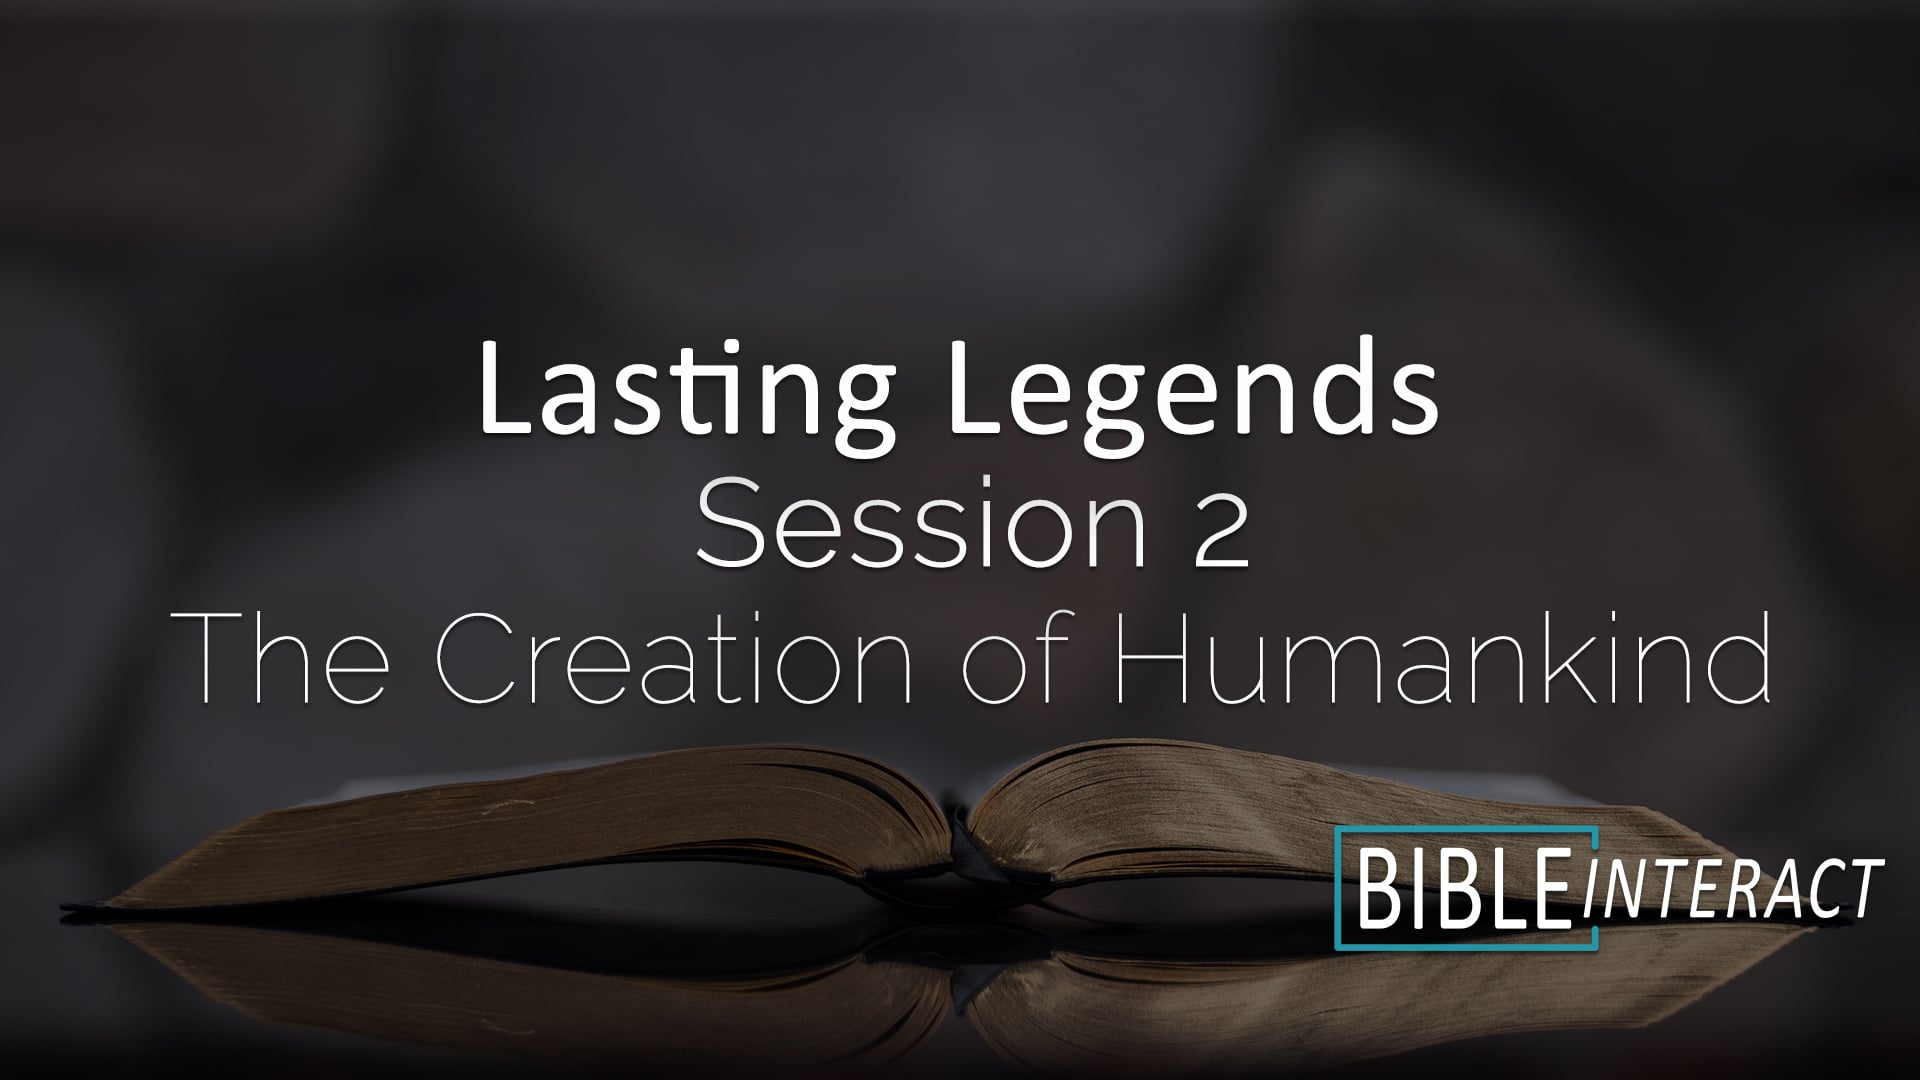 Lasting Legends Session 2: The Creation of Humankind